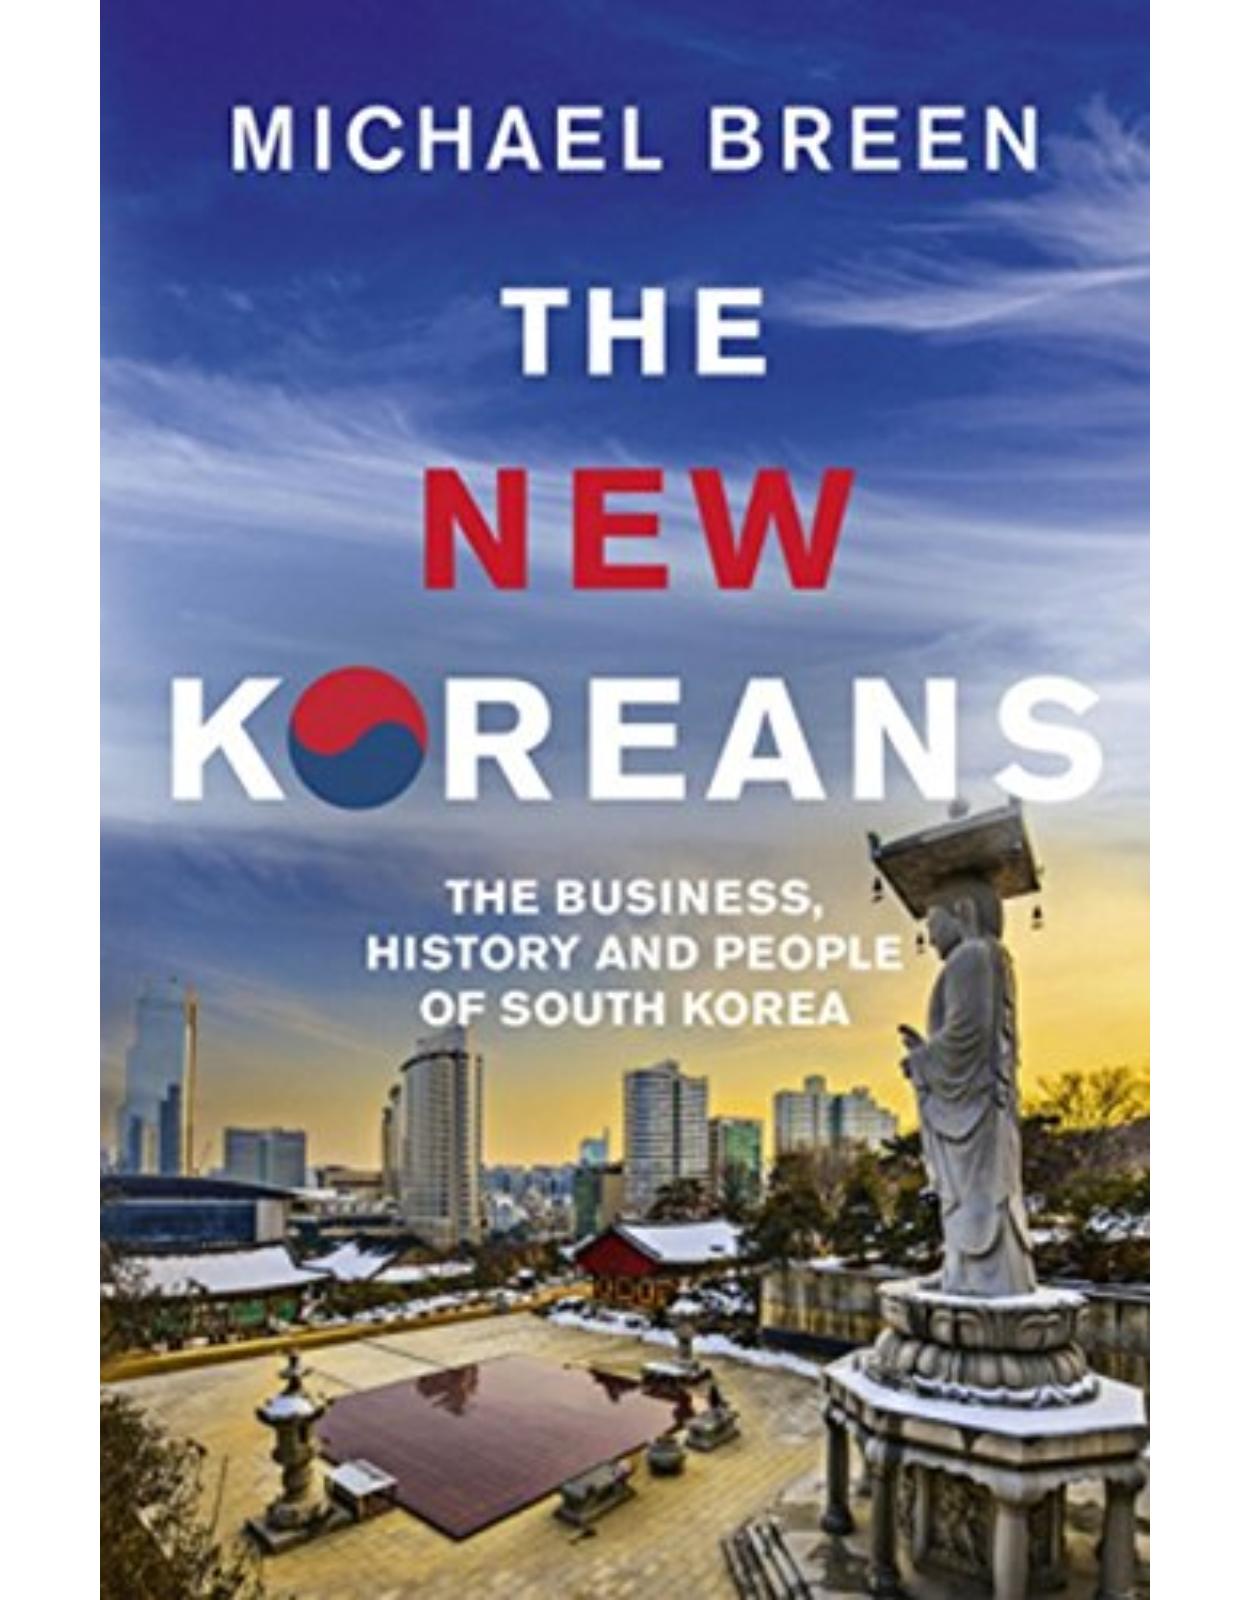 The New Koreans: The Business, History and People of South Korea